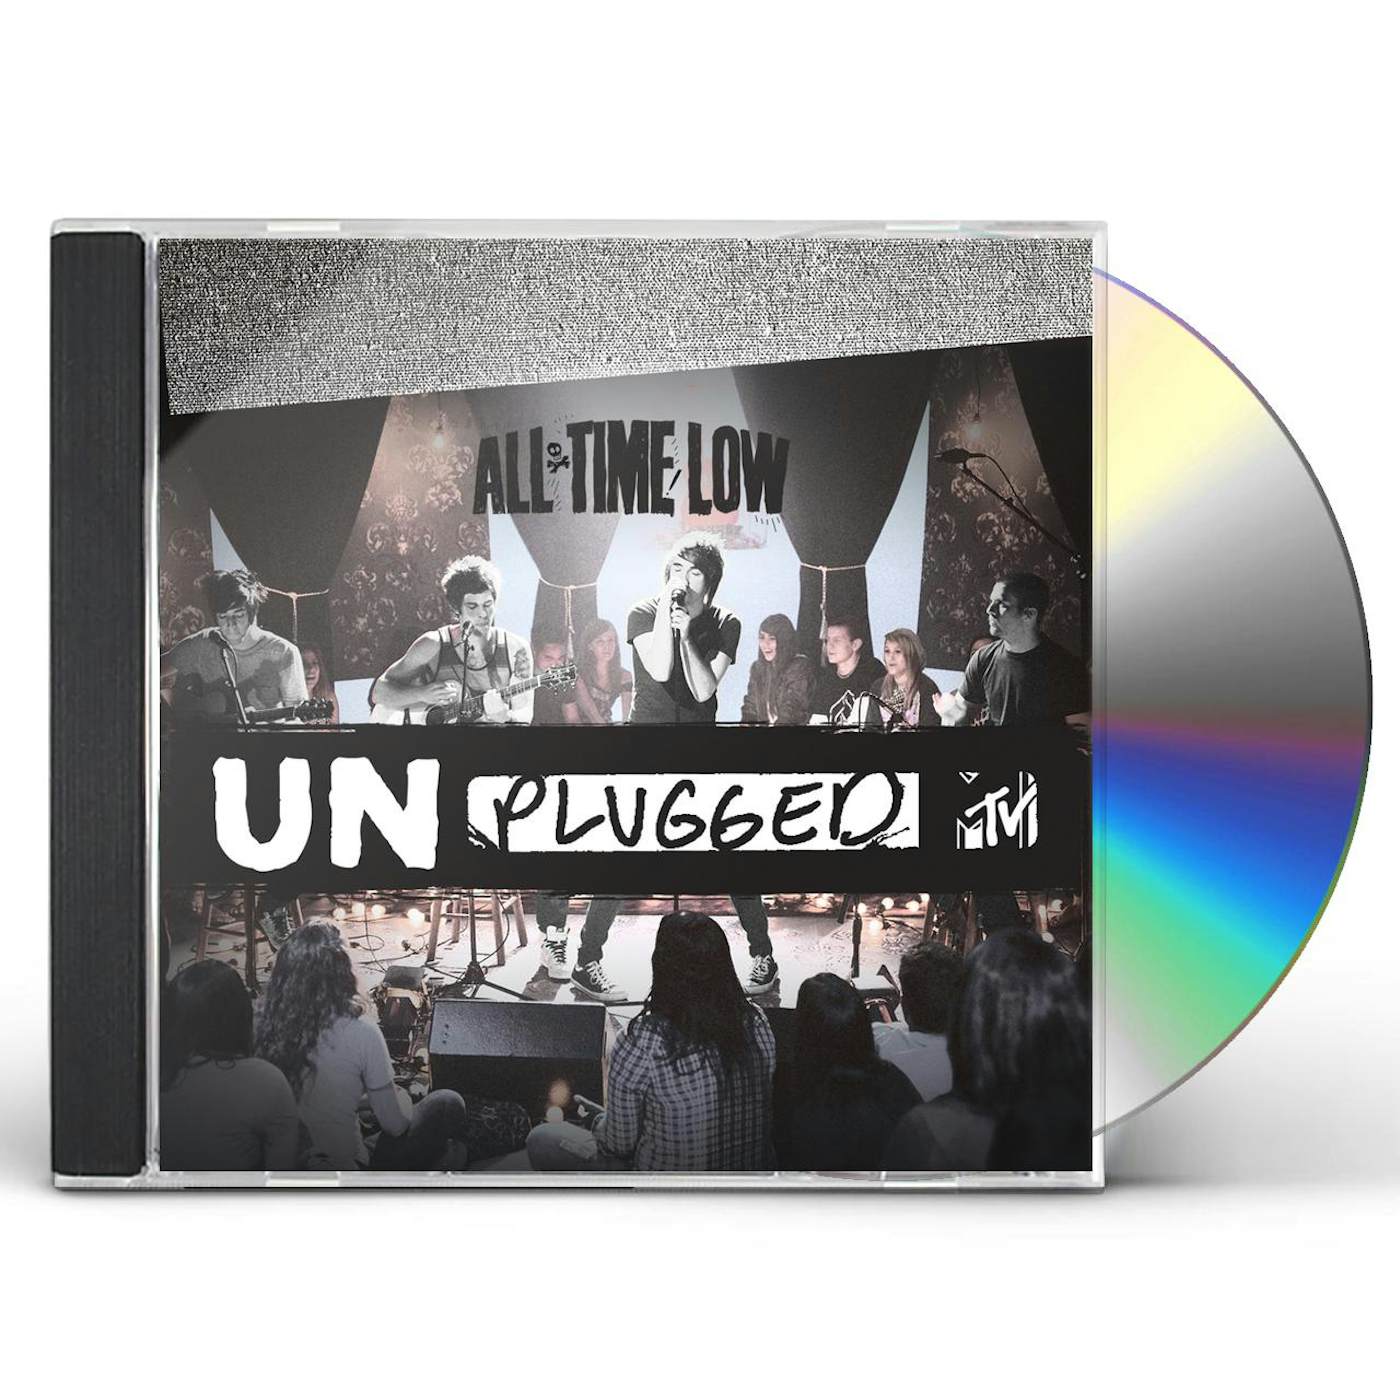 All Time Low MTV UNPLUGGED CD